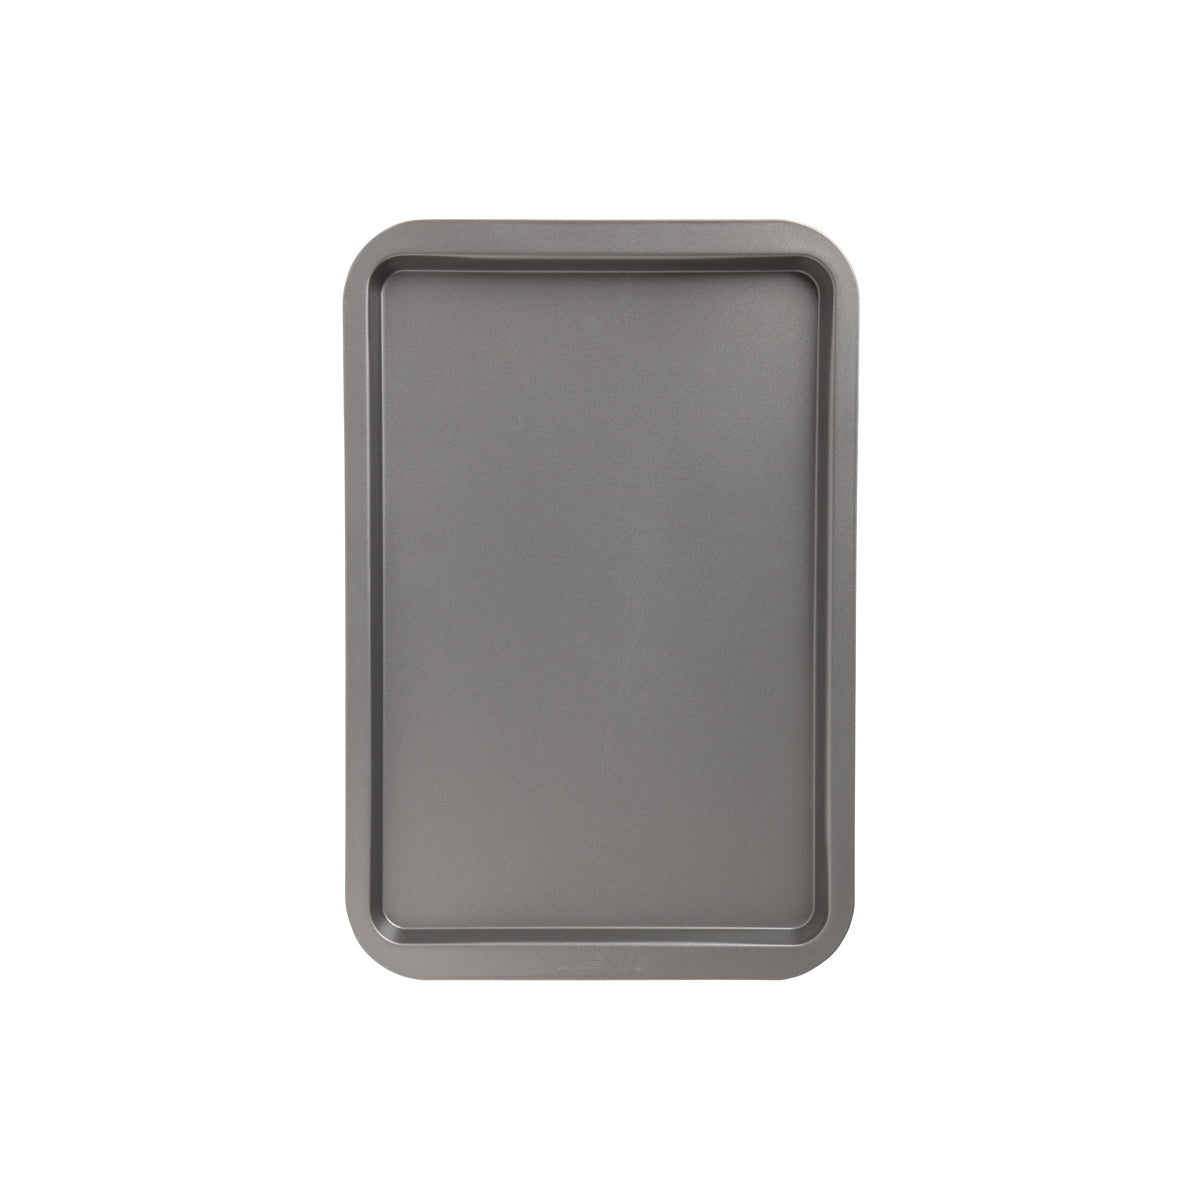 WLT40438 Wiltshire Two Toned Cookie Sheet 390x260mm Tomkin Australia Hospitality Supplies